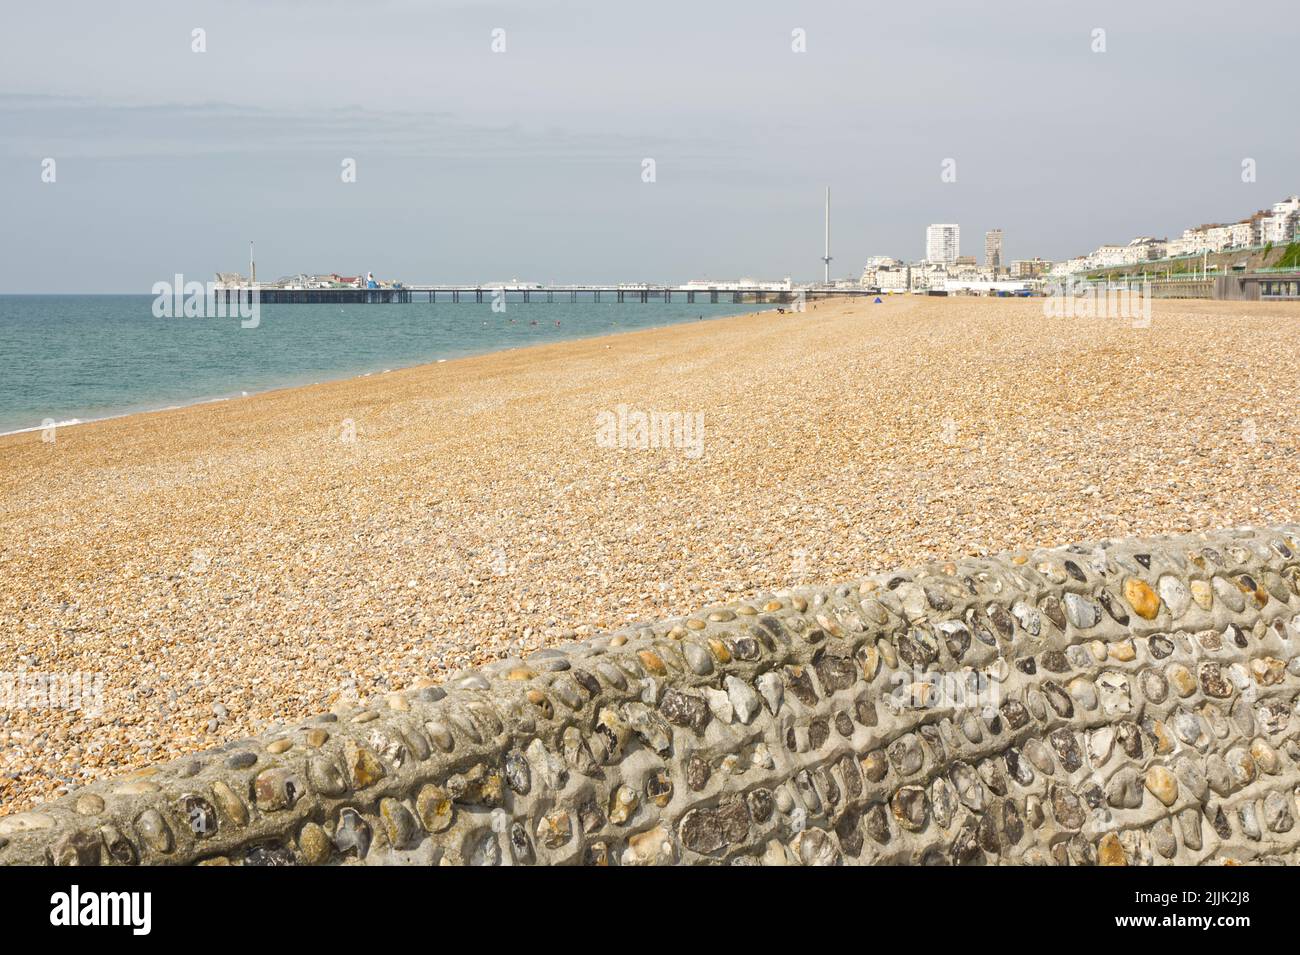 Shingle beach at Brighton in East Sussex, England. Viewed from near Marina with pier in background. Unrecognisable people relaxing on beach. Stock Photo